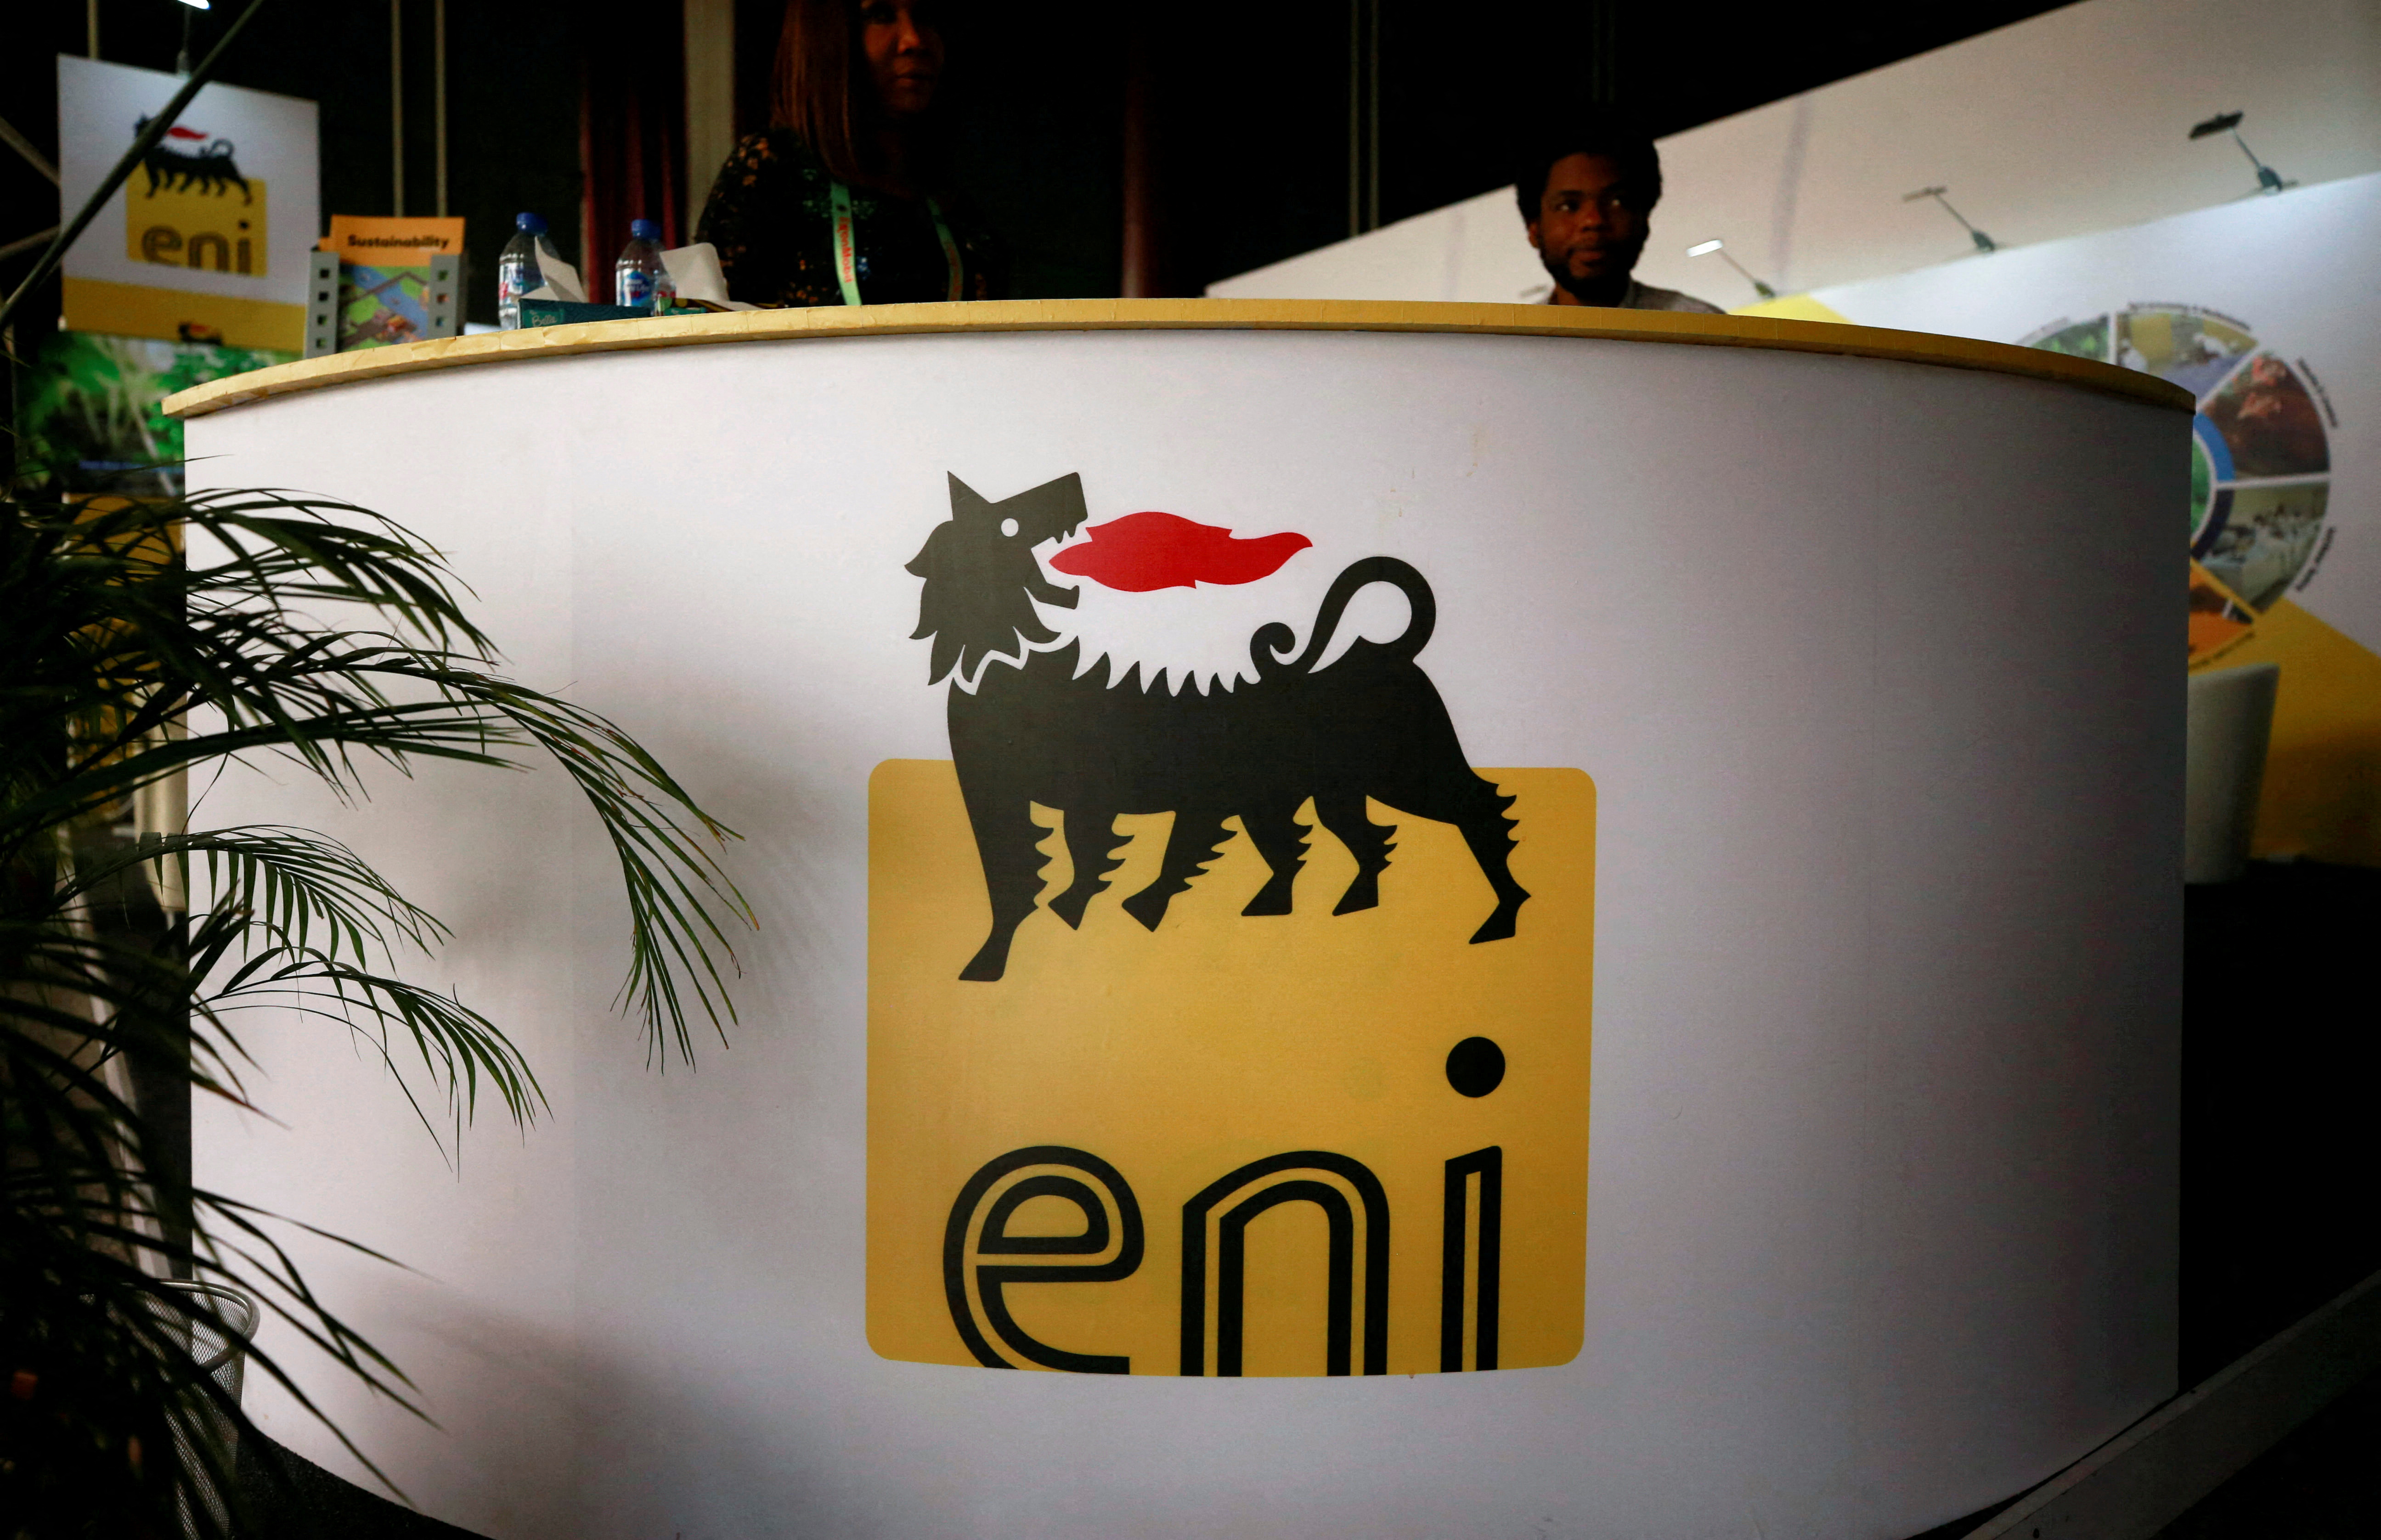 The logo of Italian energy company Eni is seen on a booth stand during the Nigeria International Petroleum Summit in Abuja